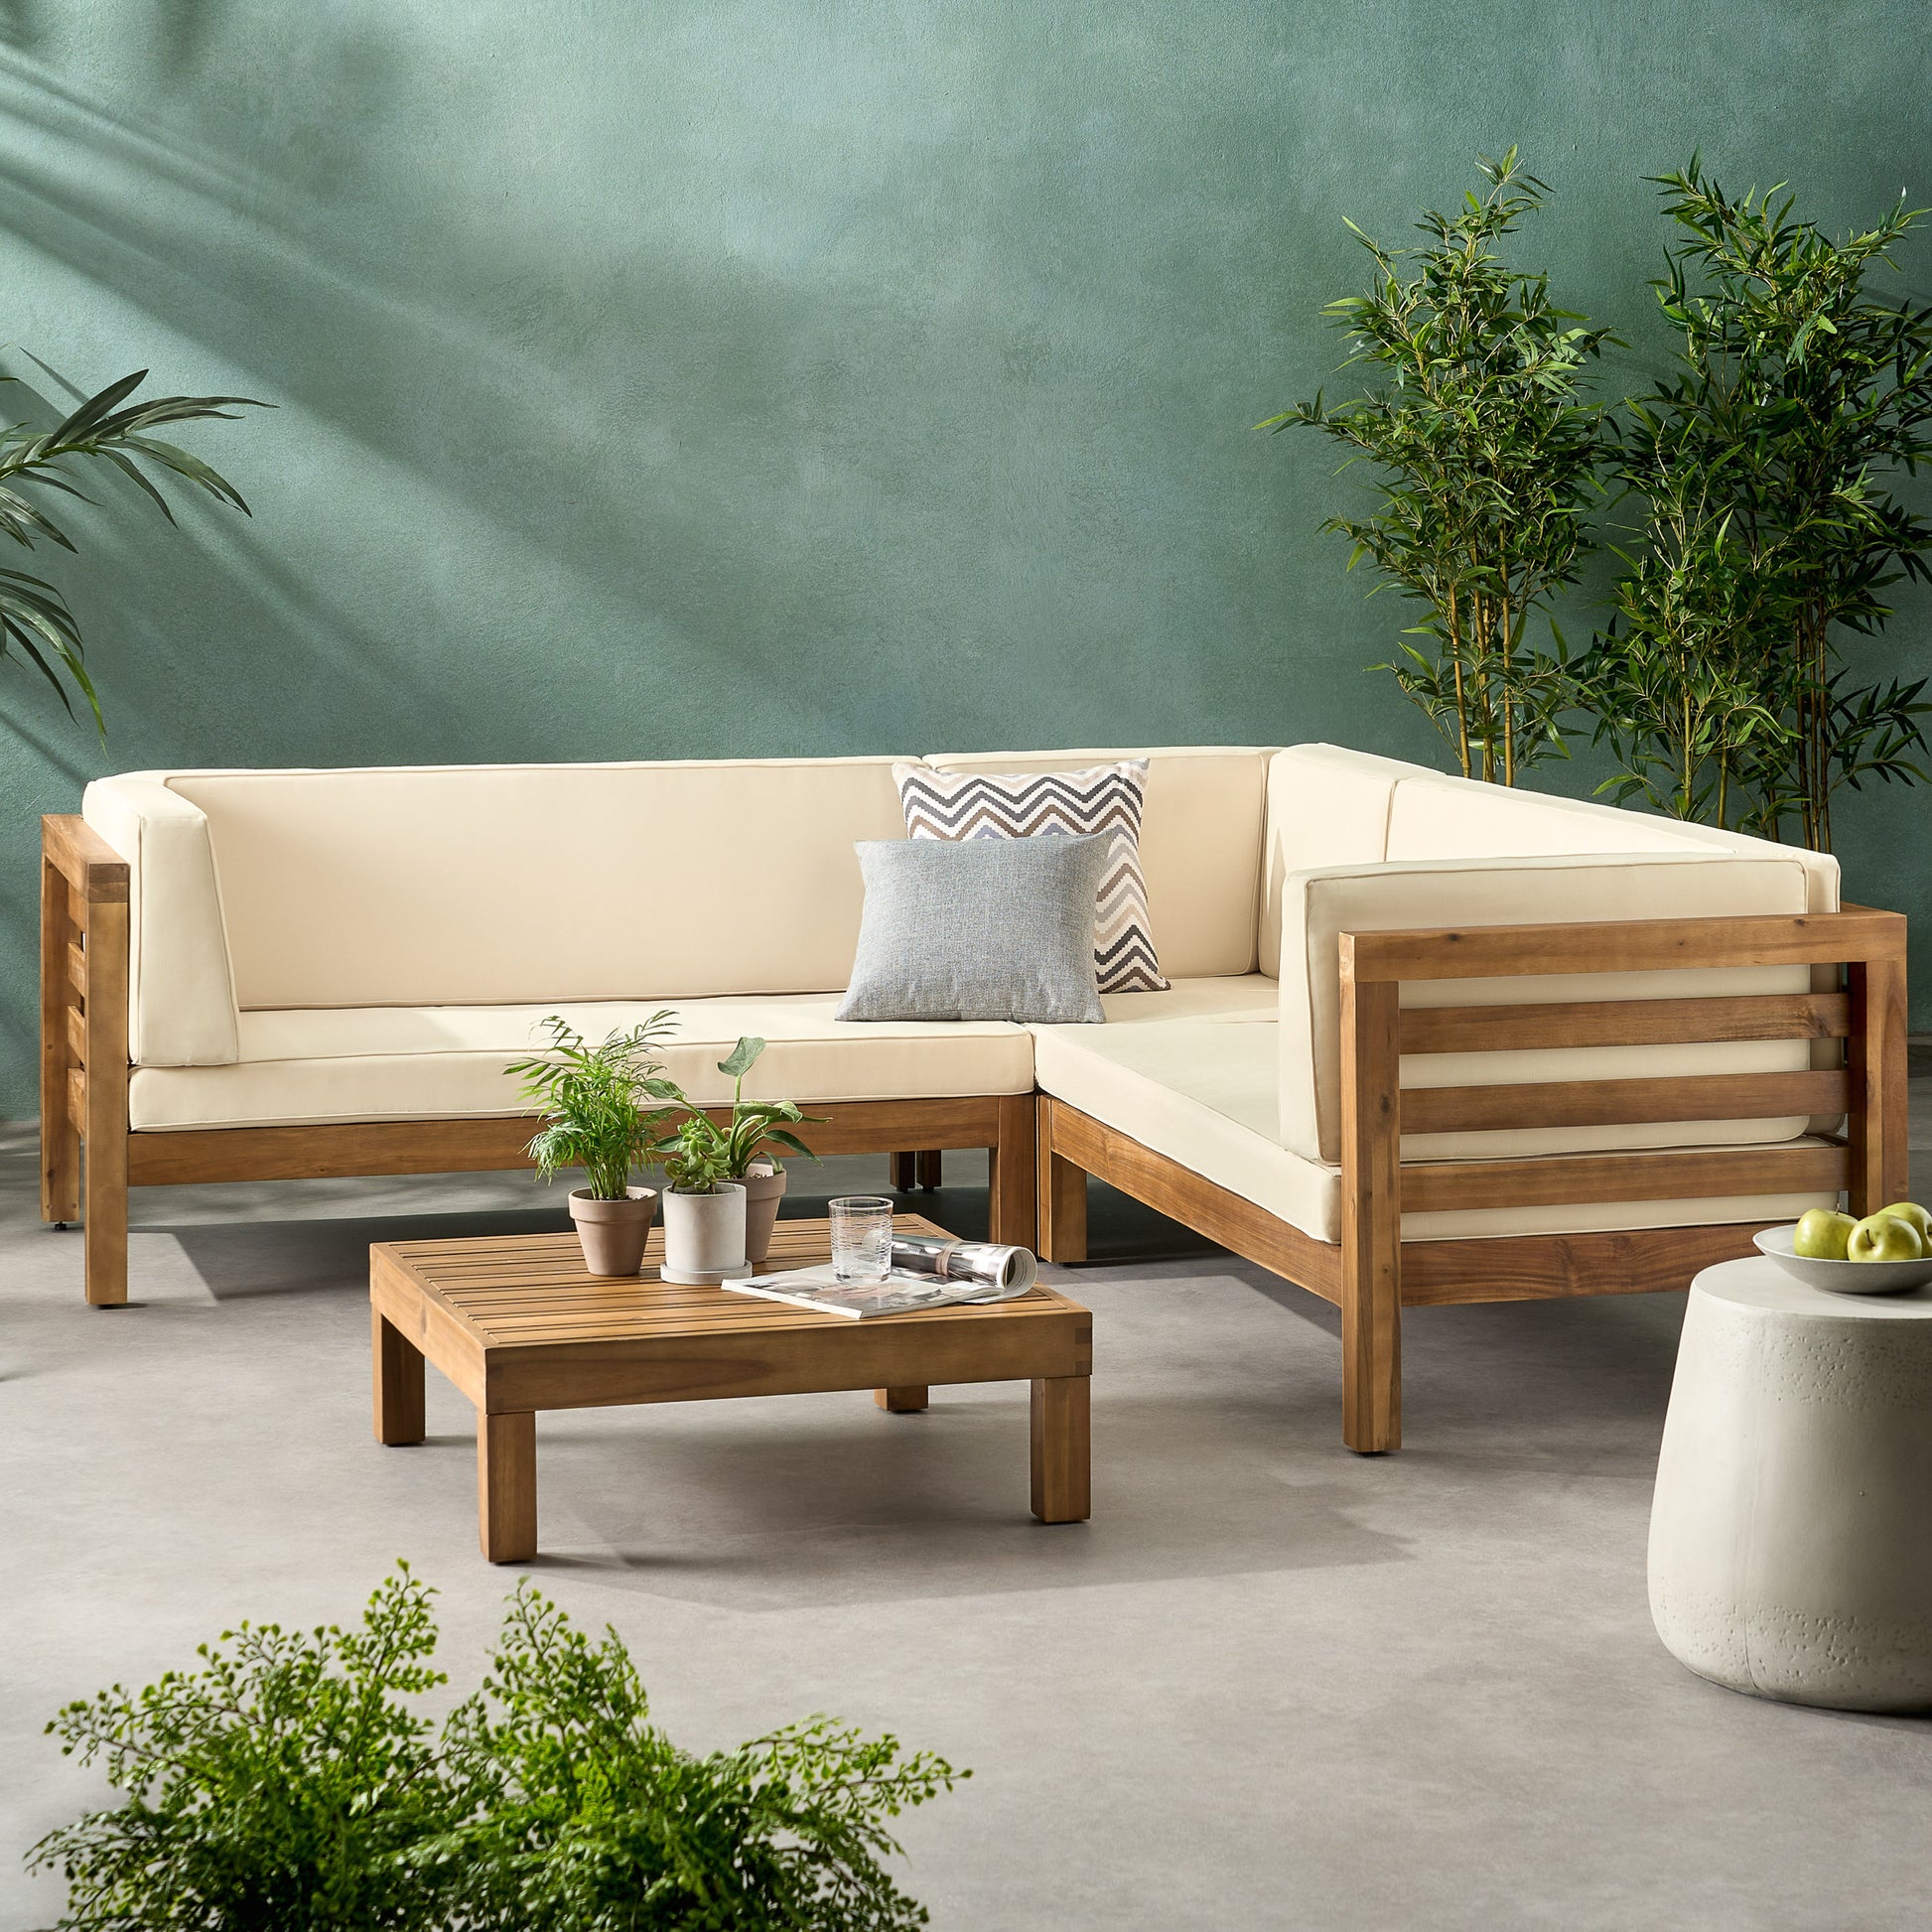 4 Piece Outdoor Wooden Sectional Set